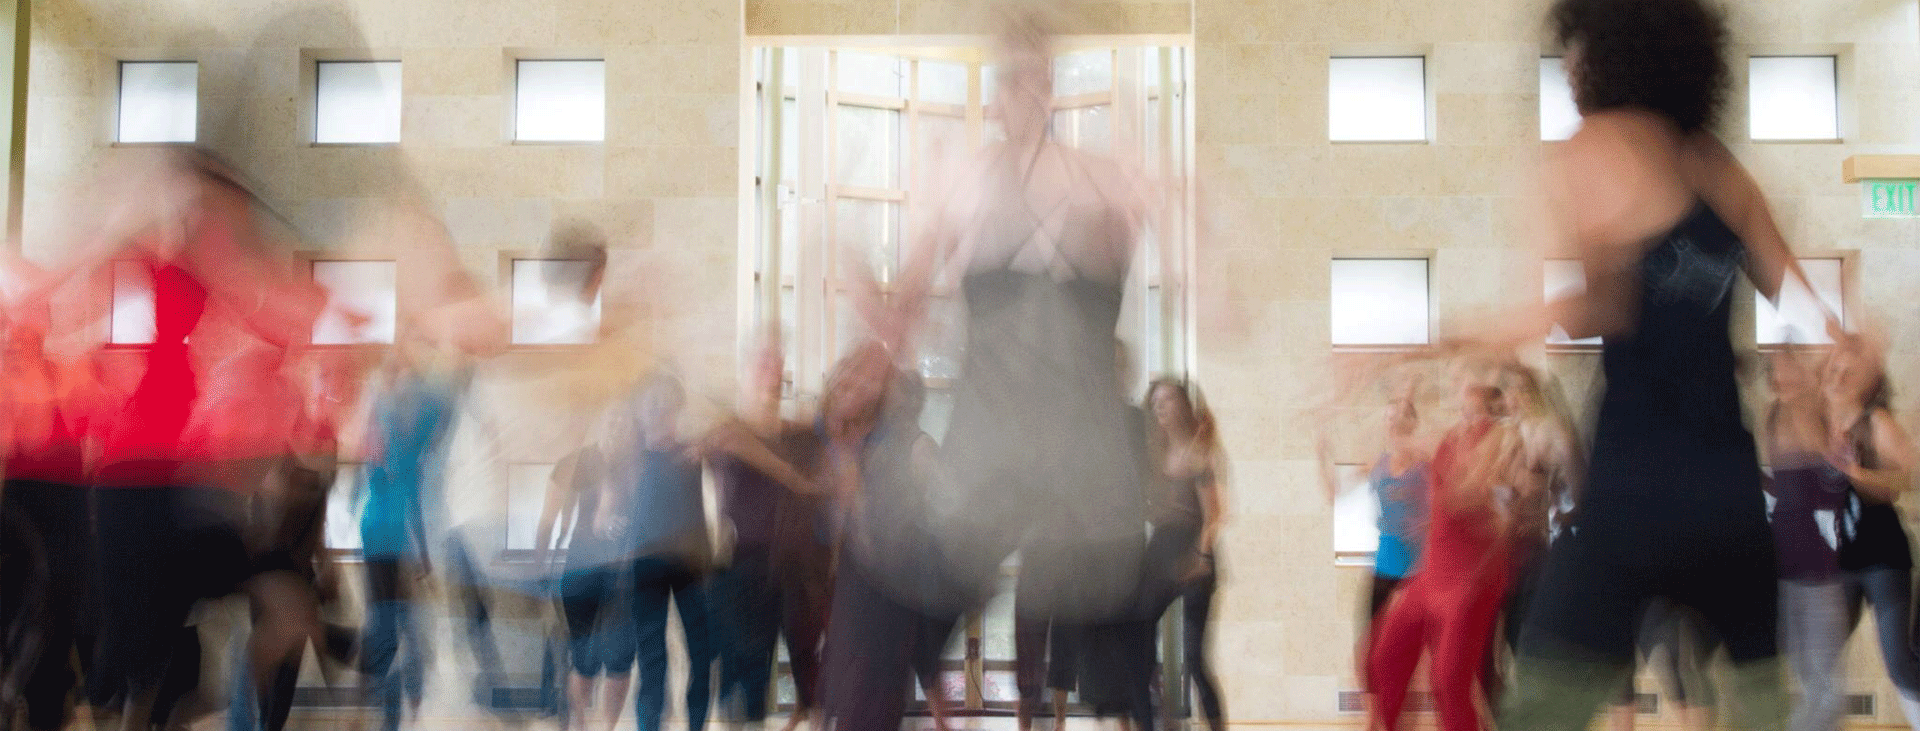 Blurred view of dancers in motion